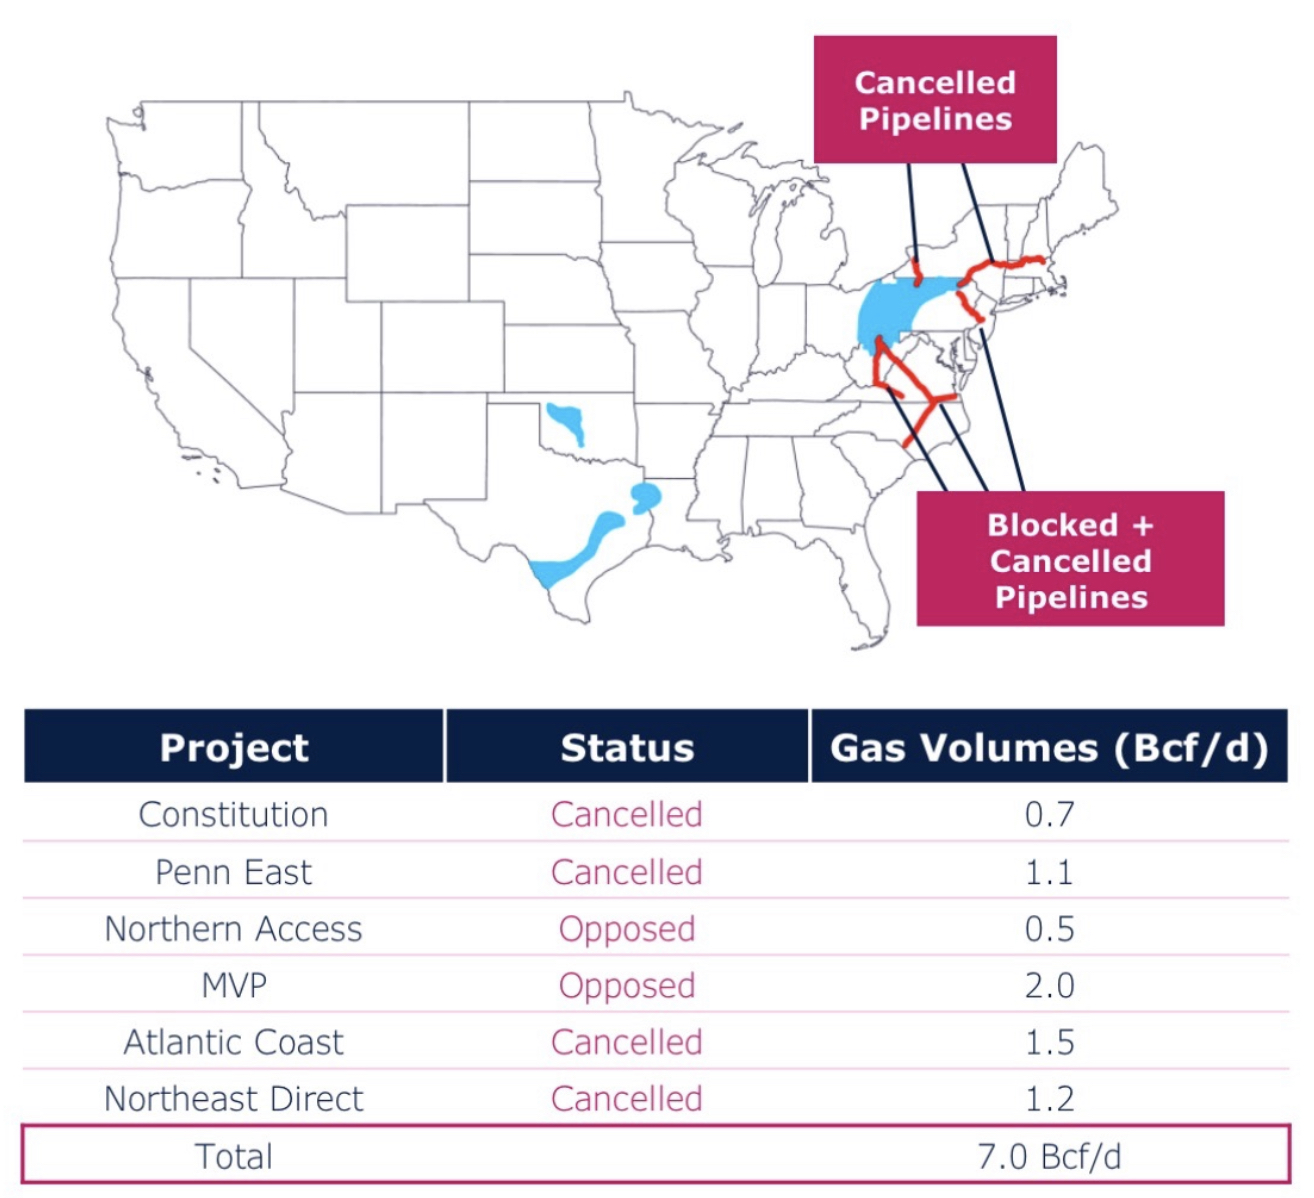 6 pipelines cancelled